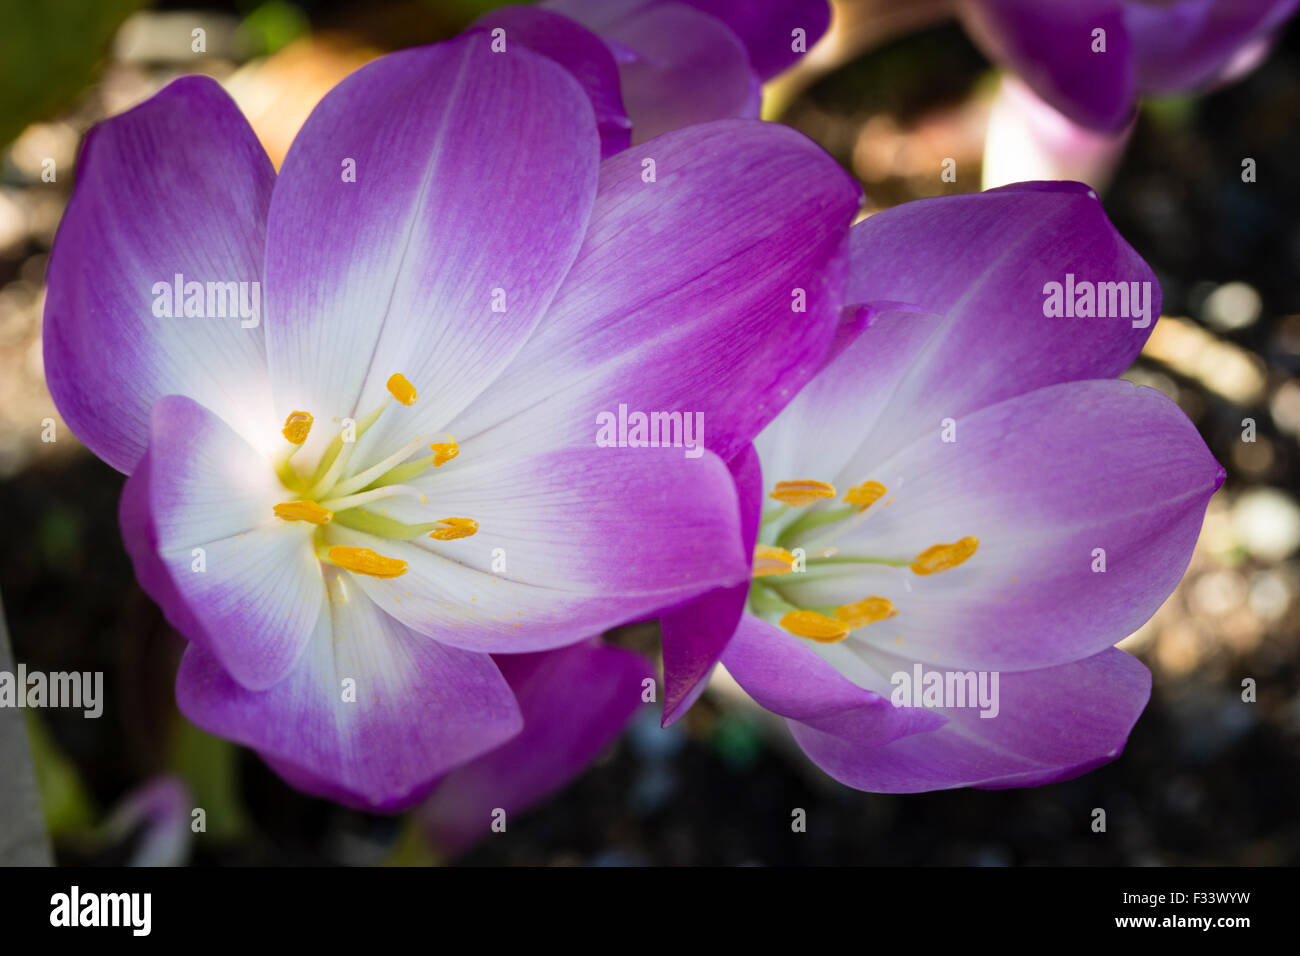 Two flowers of the September blooming meadow saffron, Colchicum 'Zephyr' Stock Photo